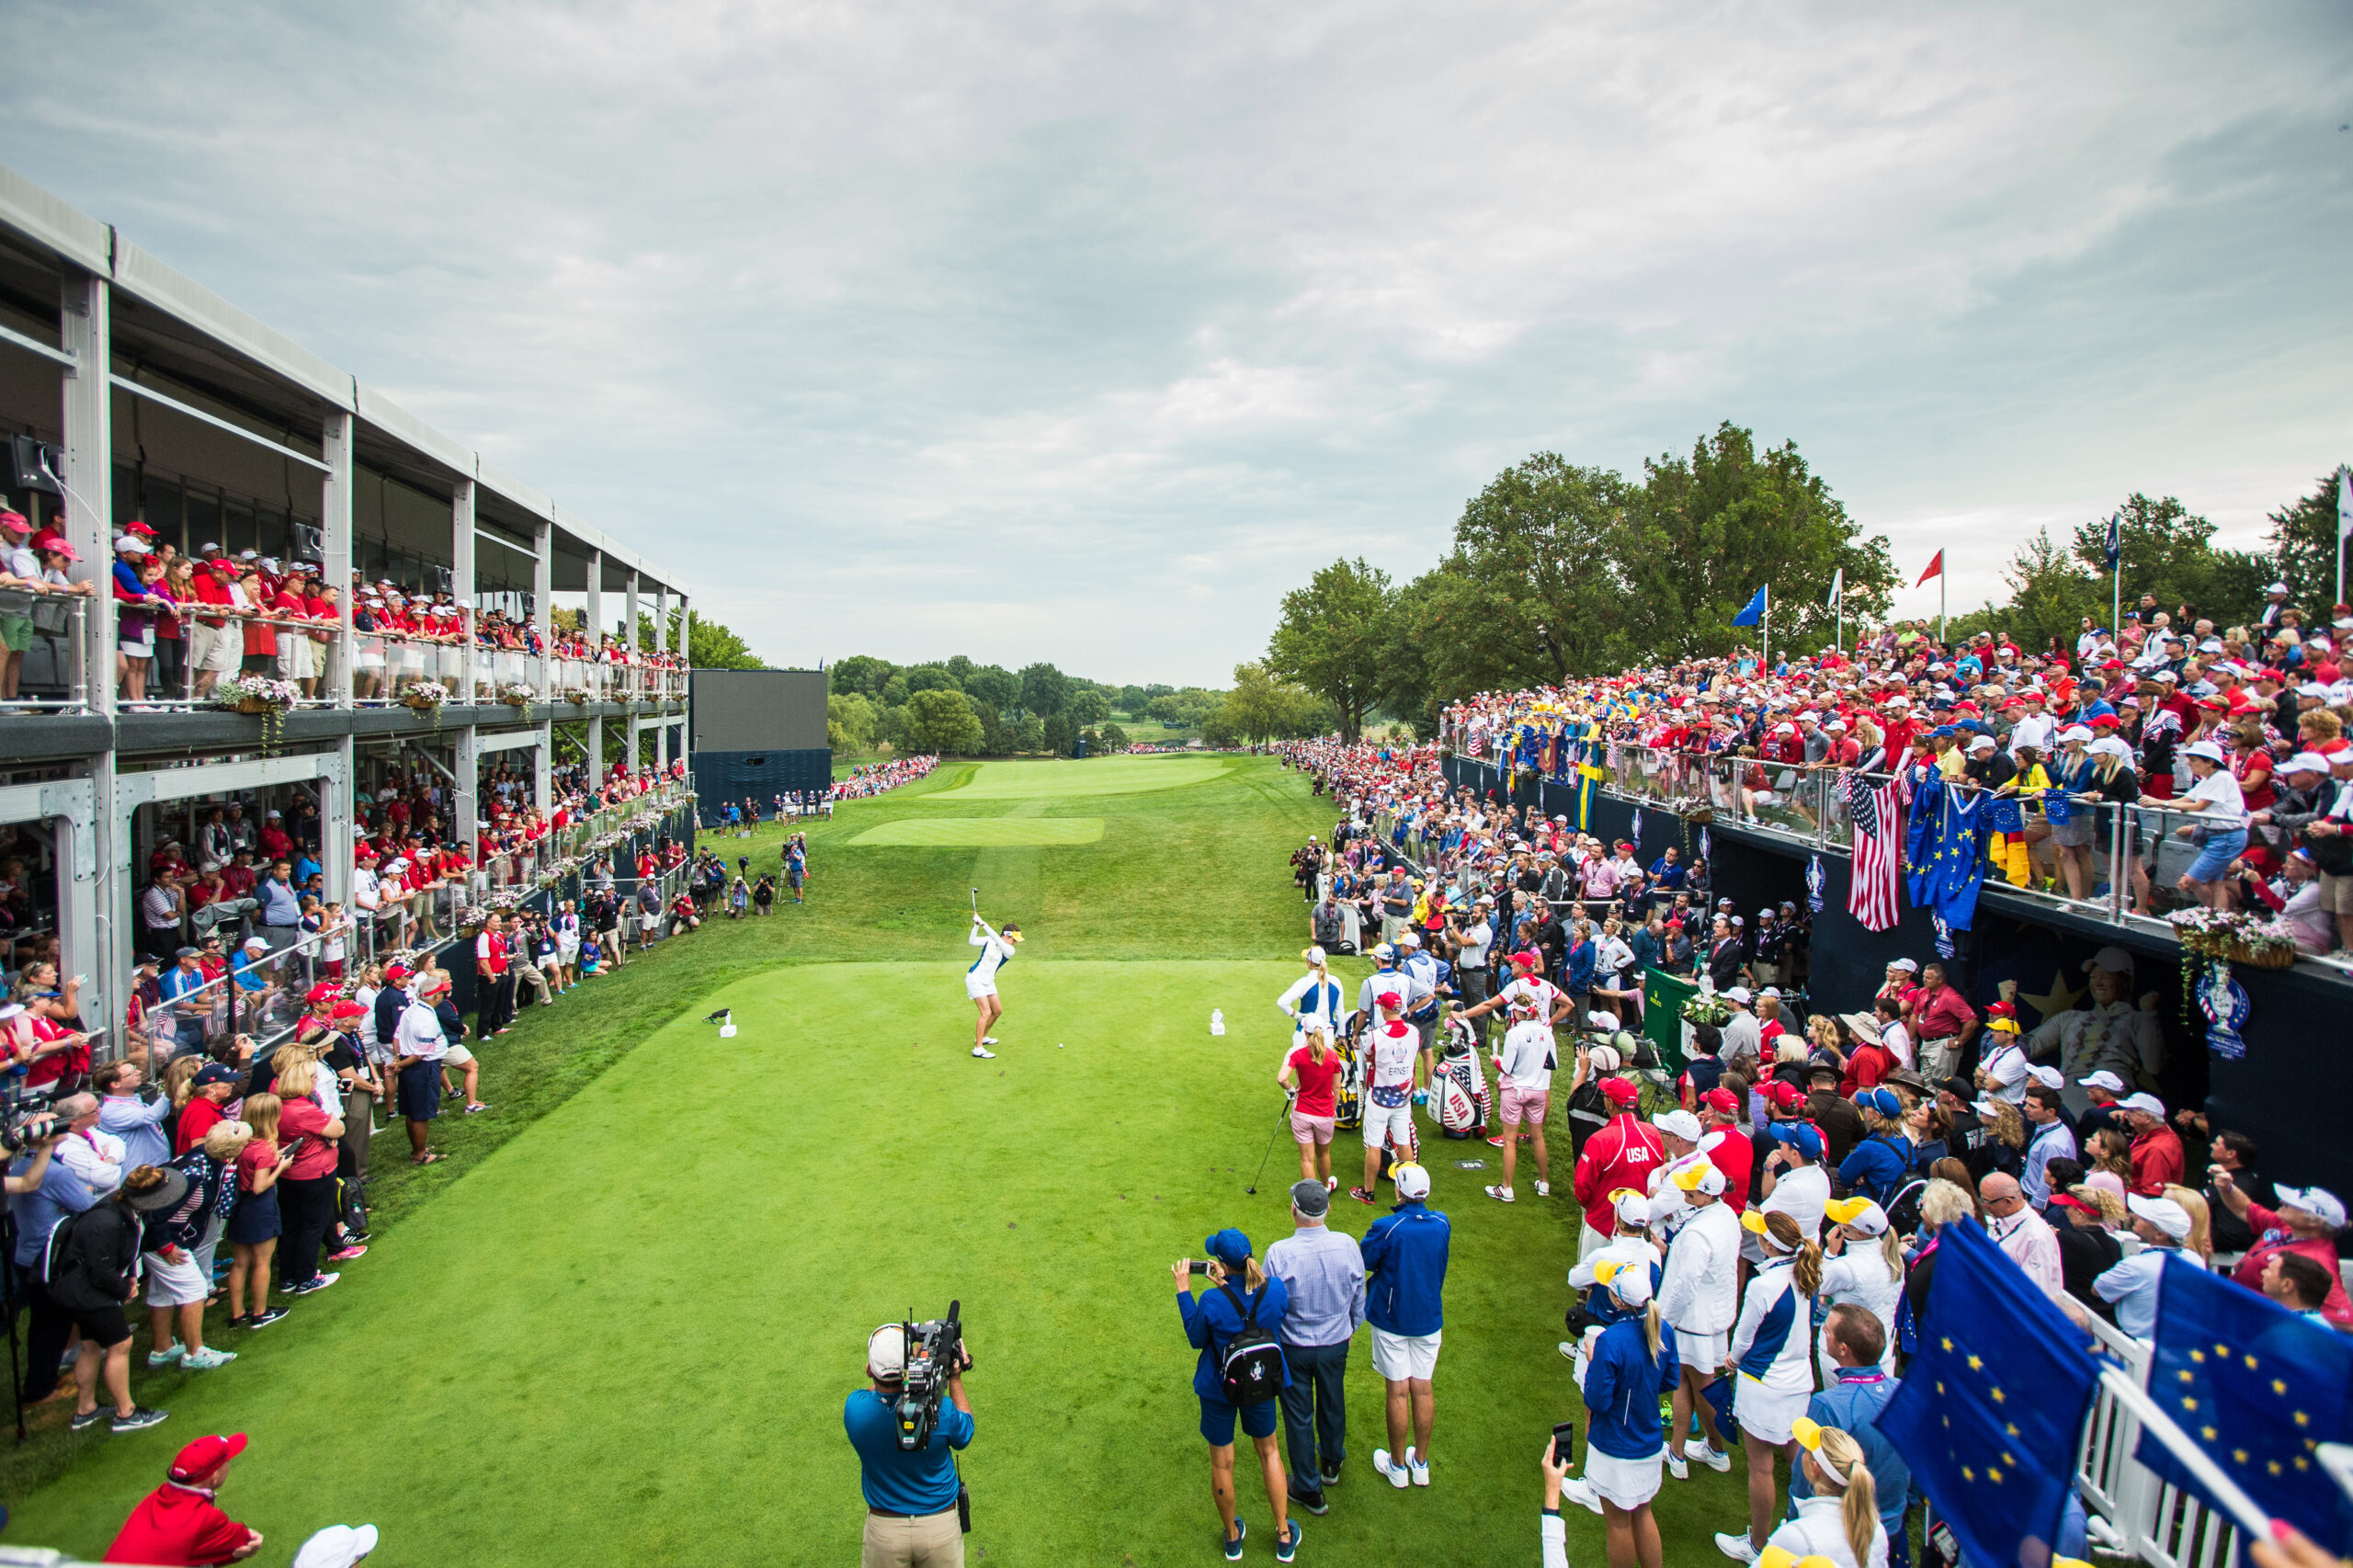 The crowd watching a tee shot at the Solheim Cup